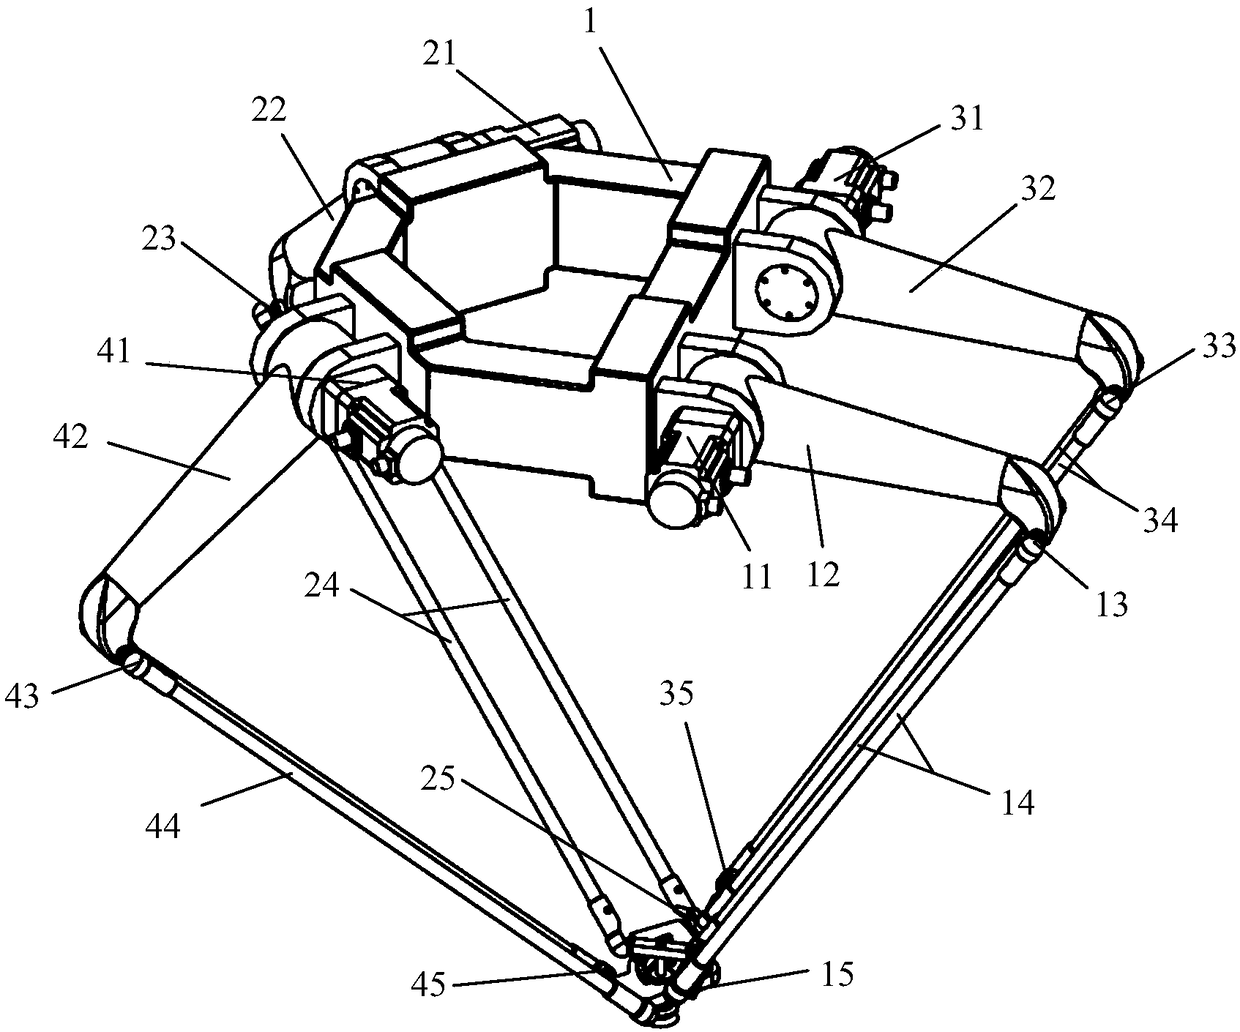 A Parallel Robot Mechanism Realizing Scara Motion